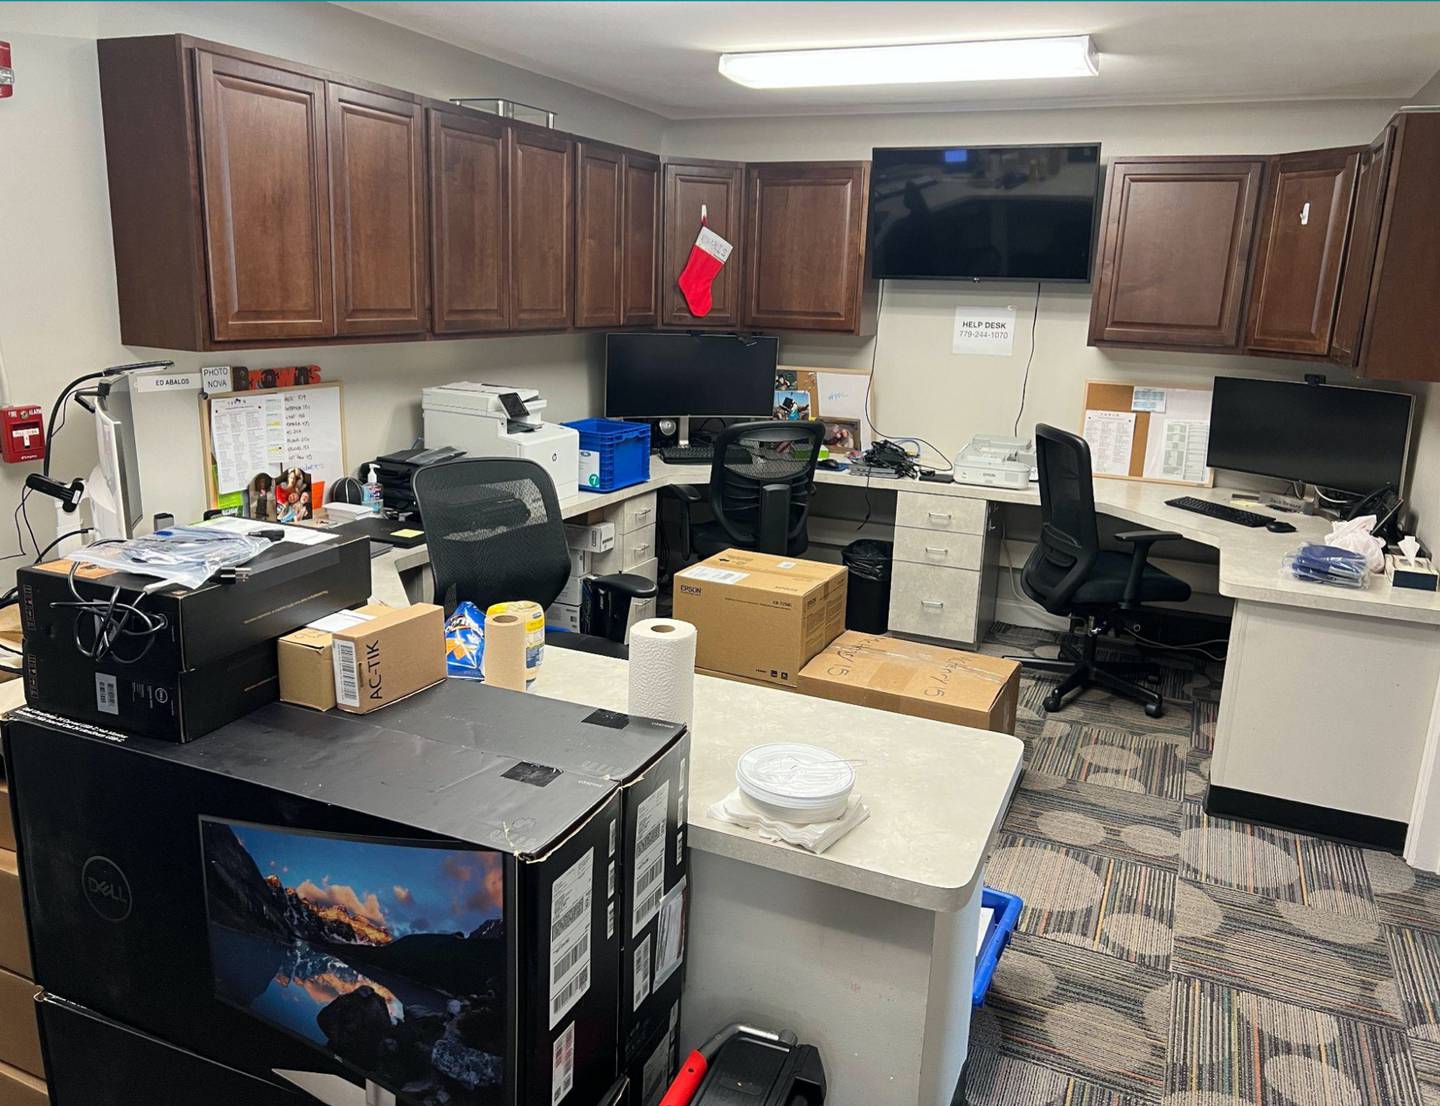 This office at McHenry School District 15's central office is one example shared by Supt. Ryan Josh Reitz in a presentation to the school board on Nov. 29, 2022, on why a larger facility is needed.